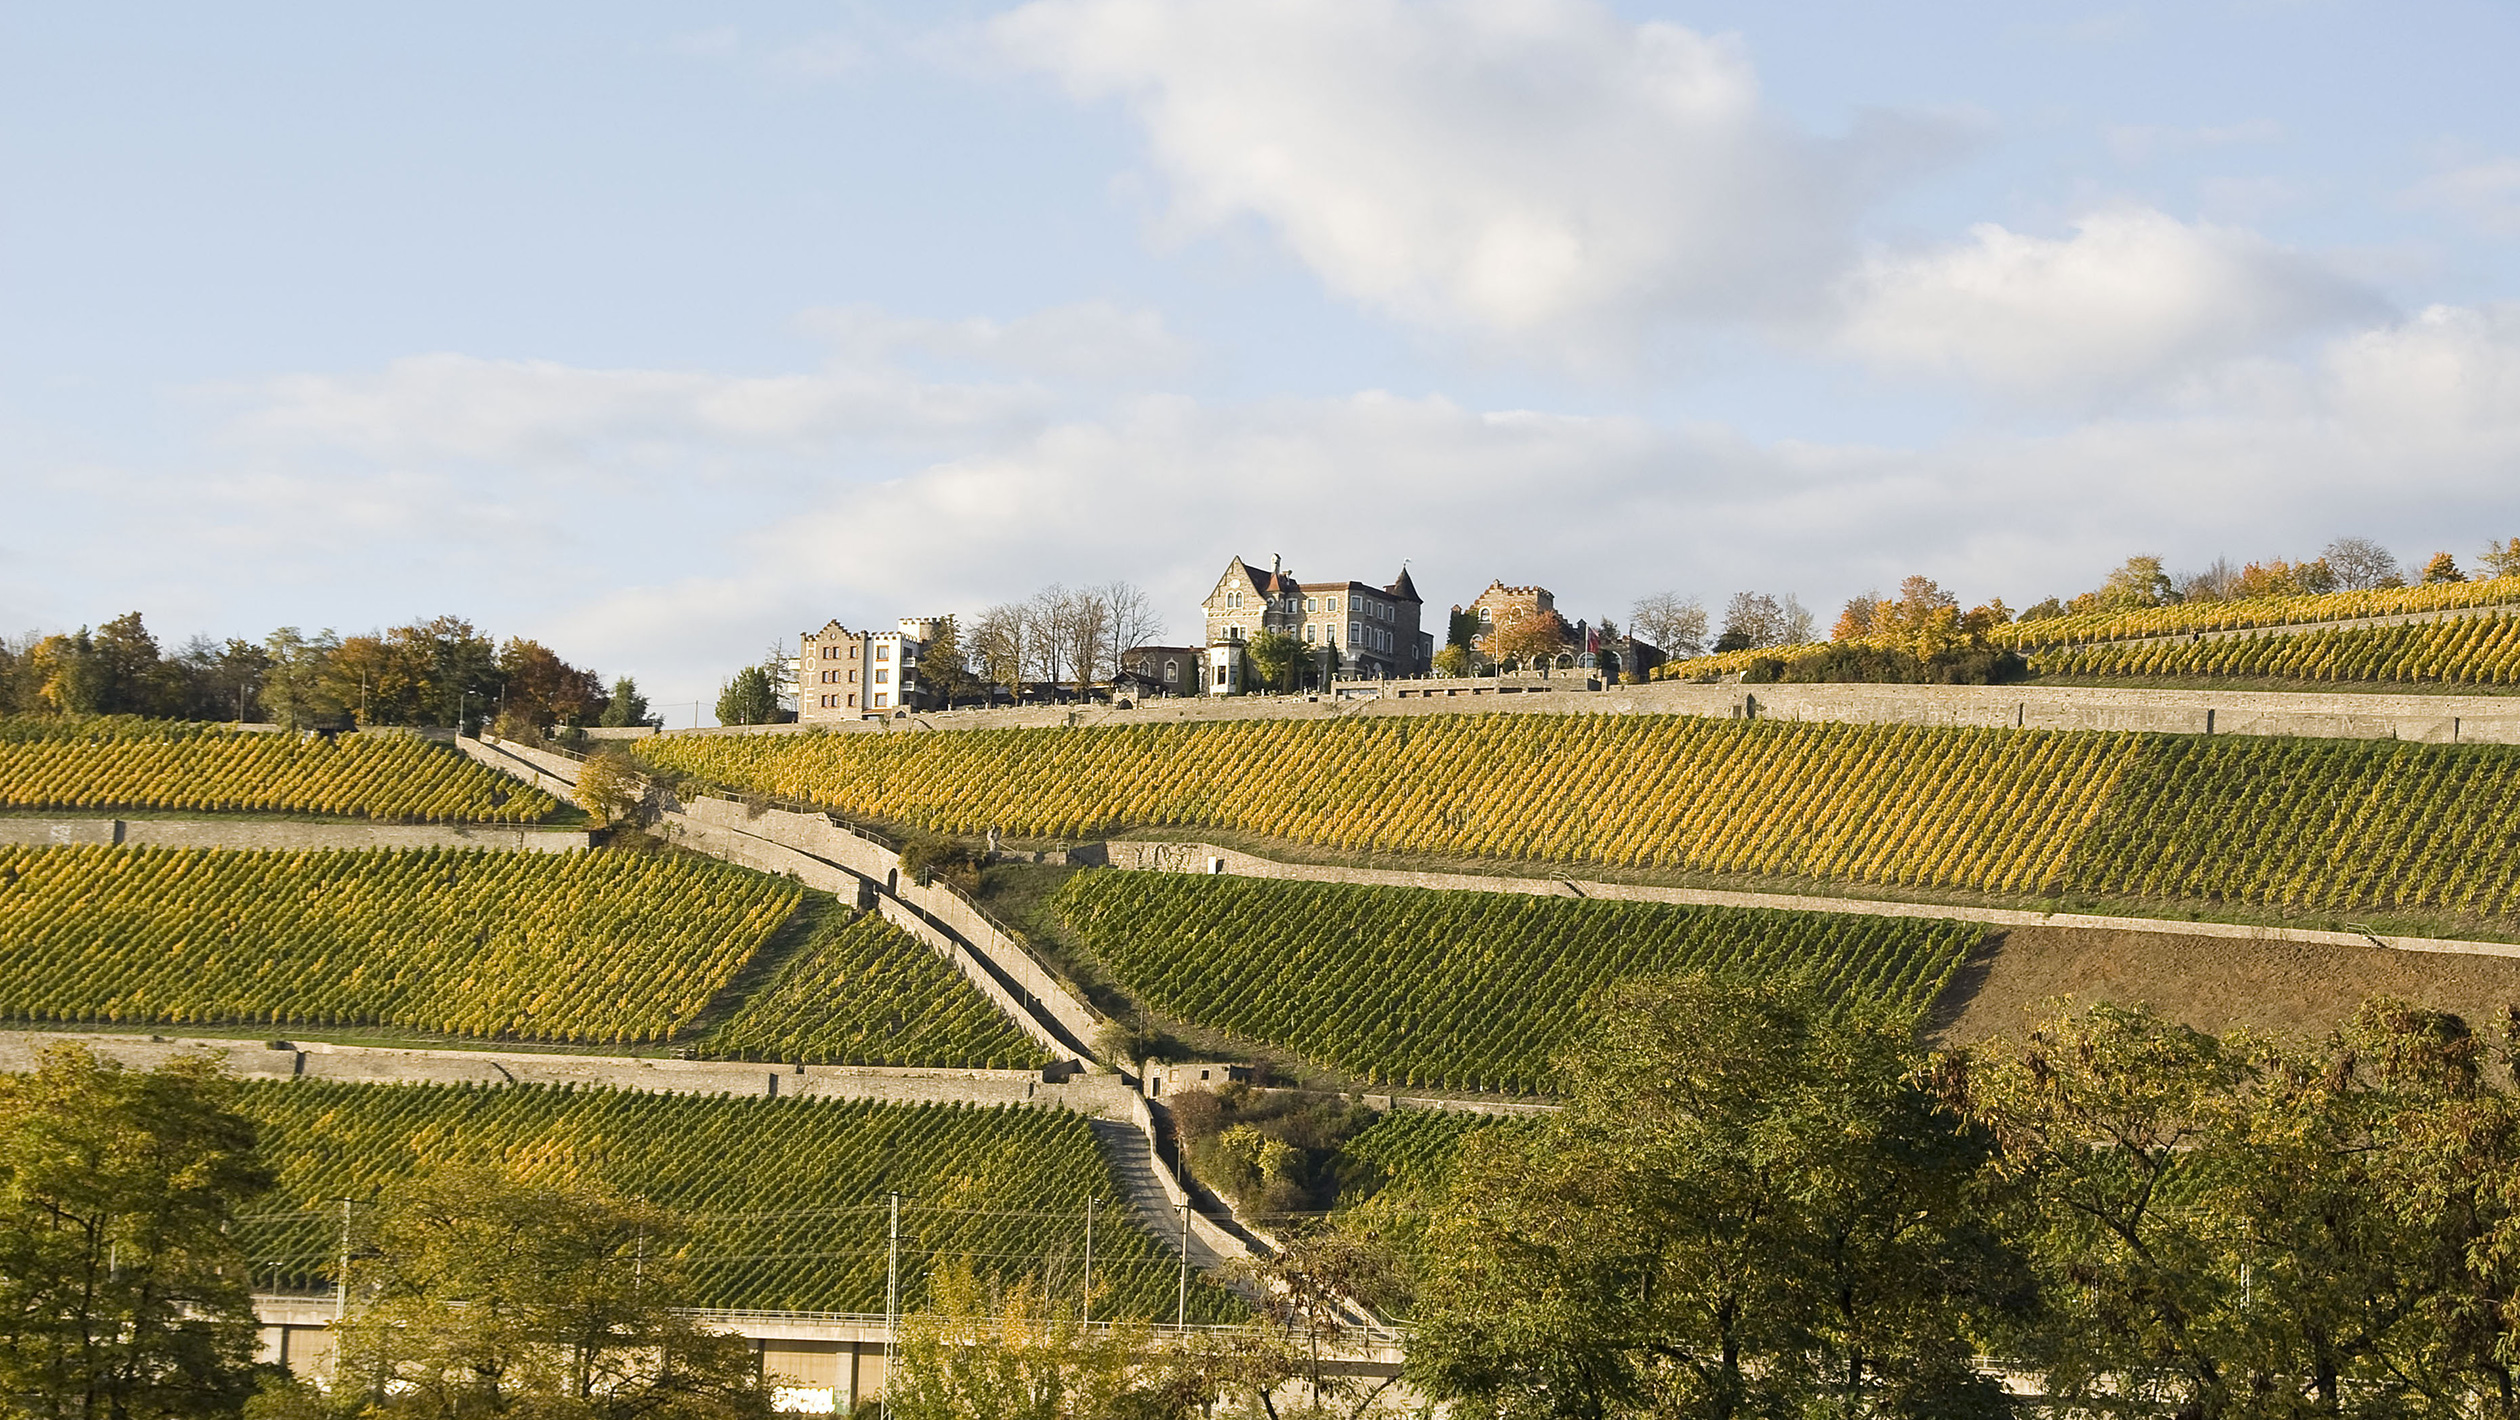 In some pockets of Franken, which is home to a wealth of old Silvaner vineyards, vintners are finding distinctive color mutations of the variety.